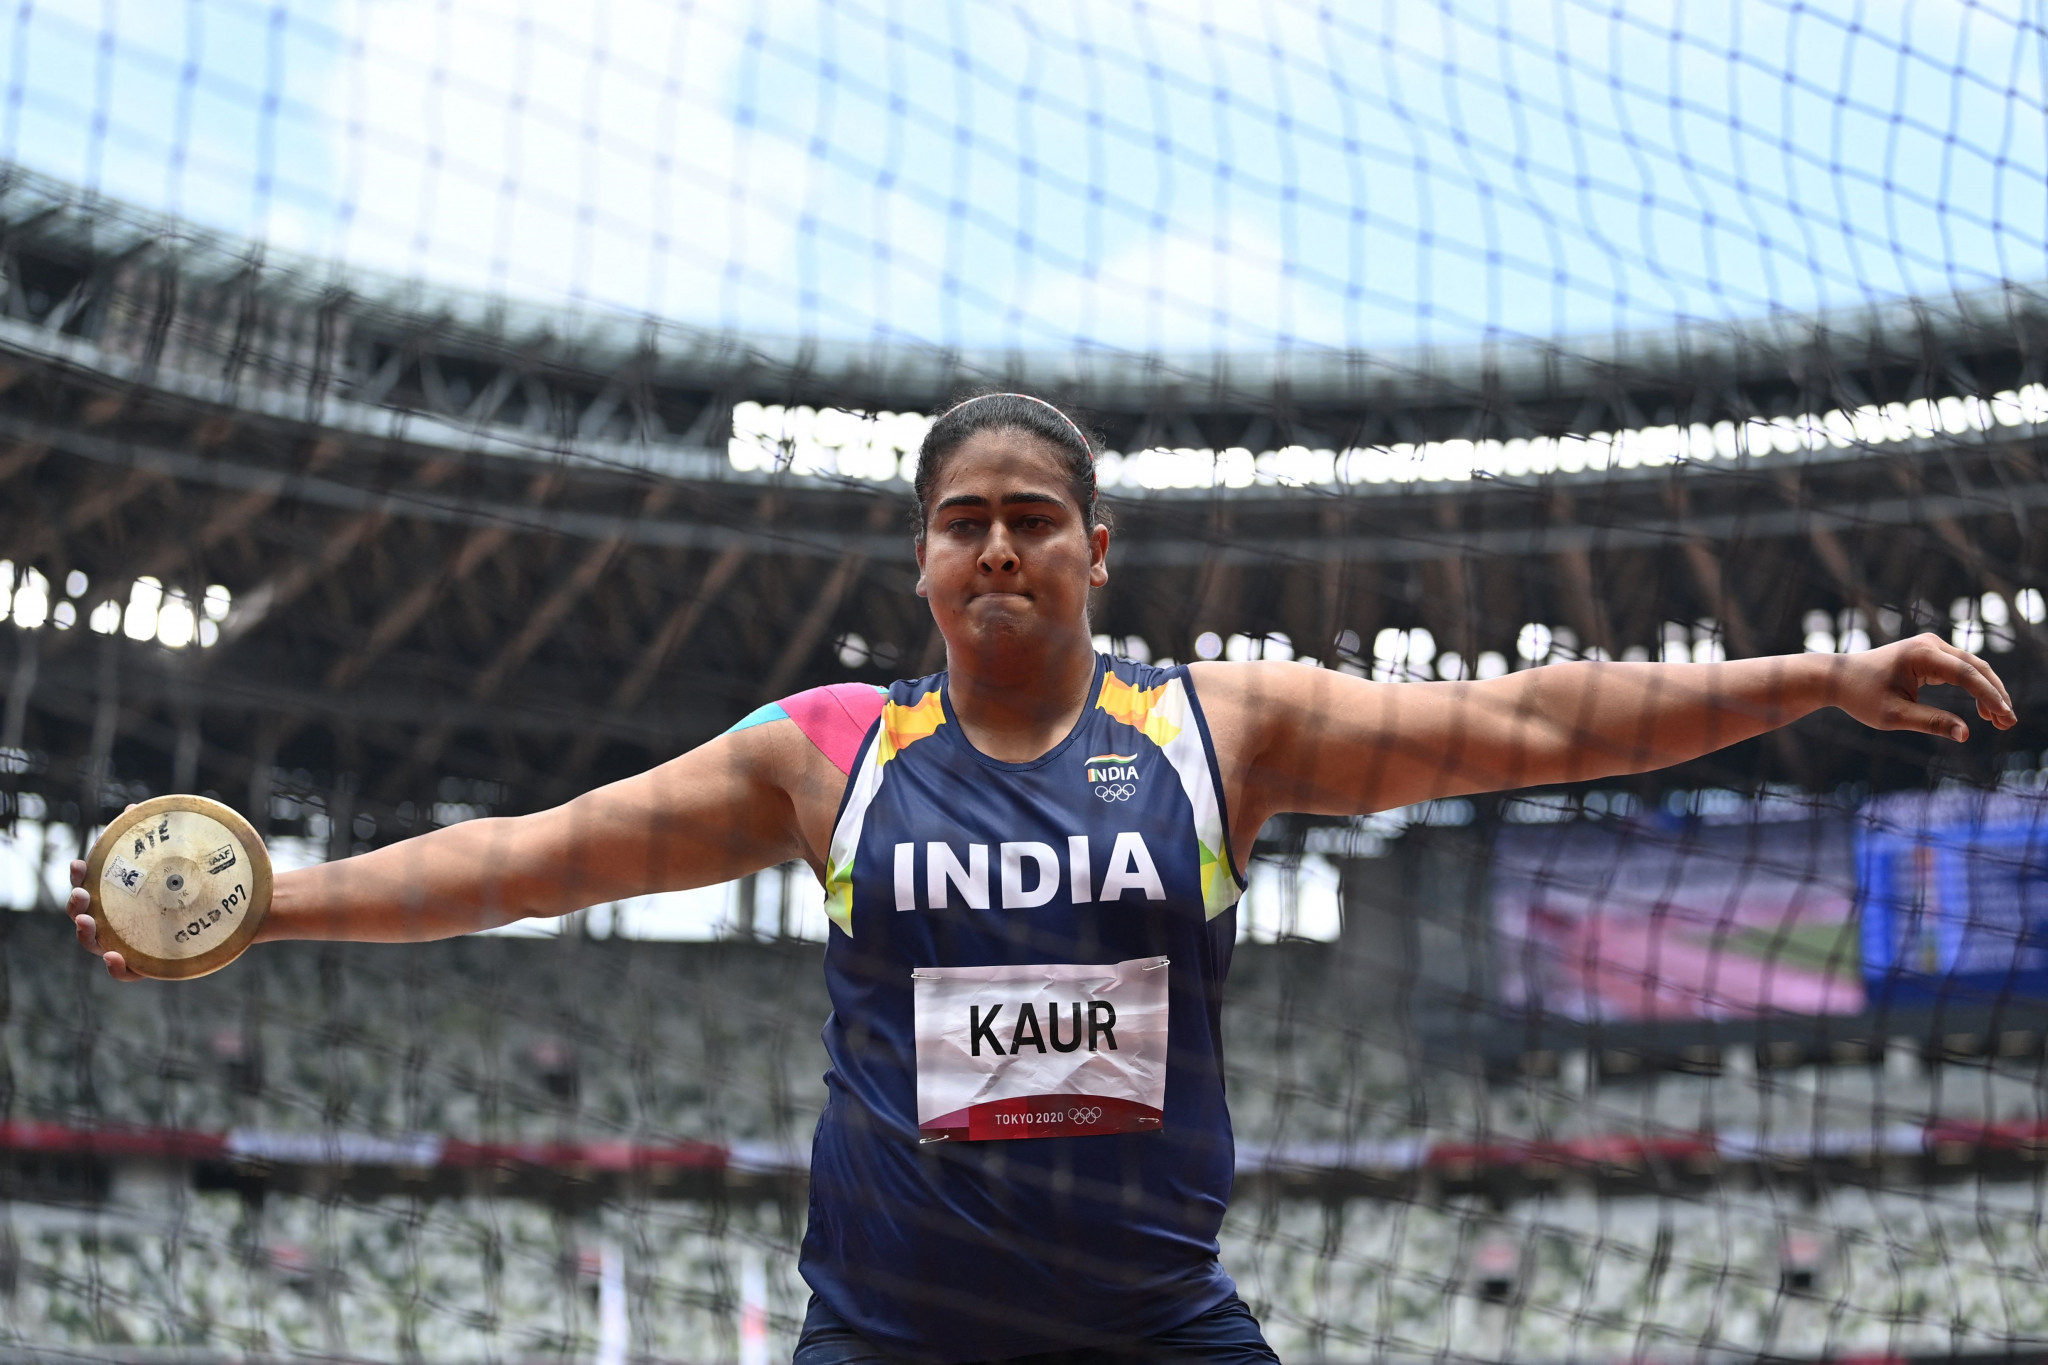 Indian discus record-holder suspended after positive doping test